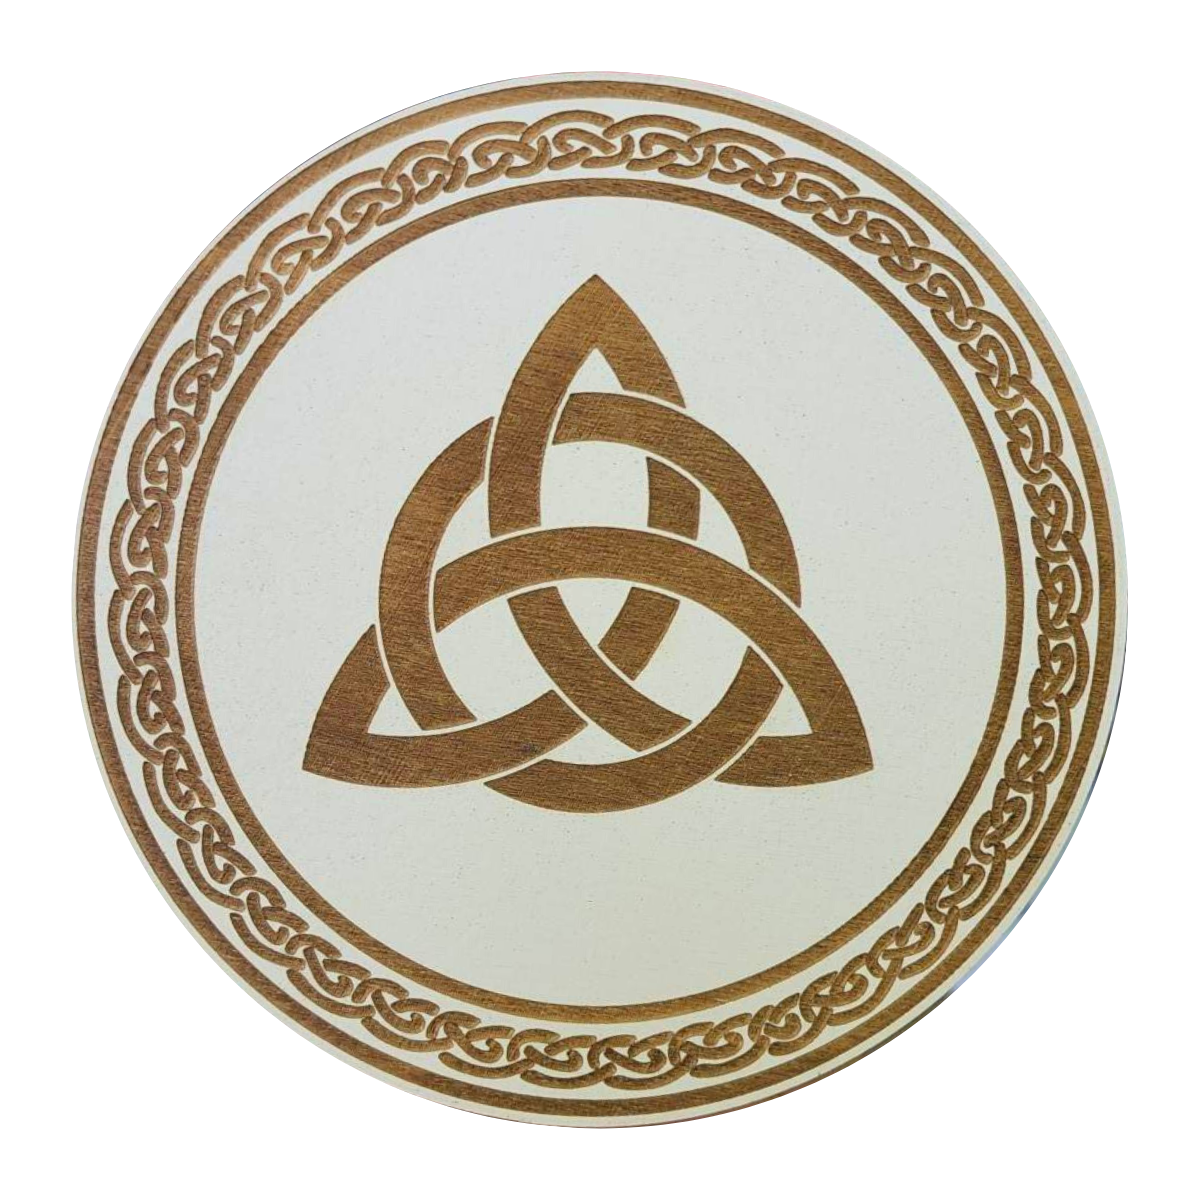 Triqueta witches knot crystal grid wooden plate